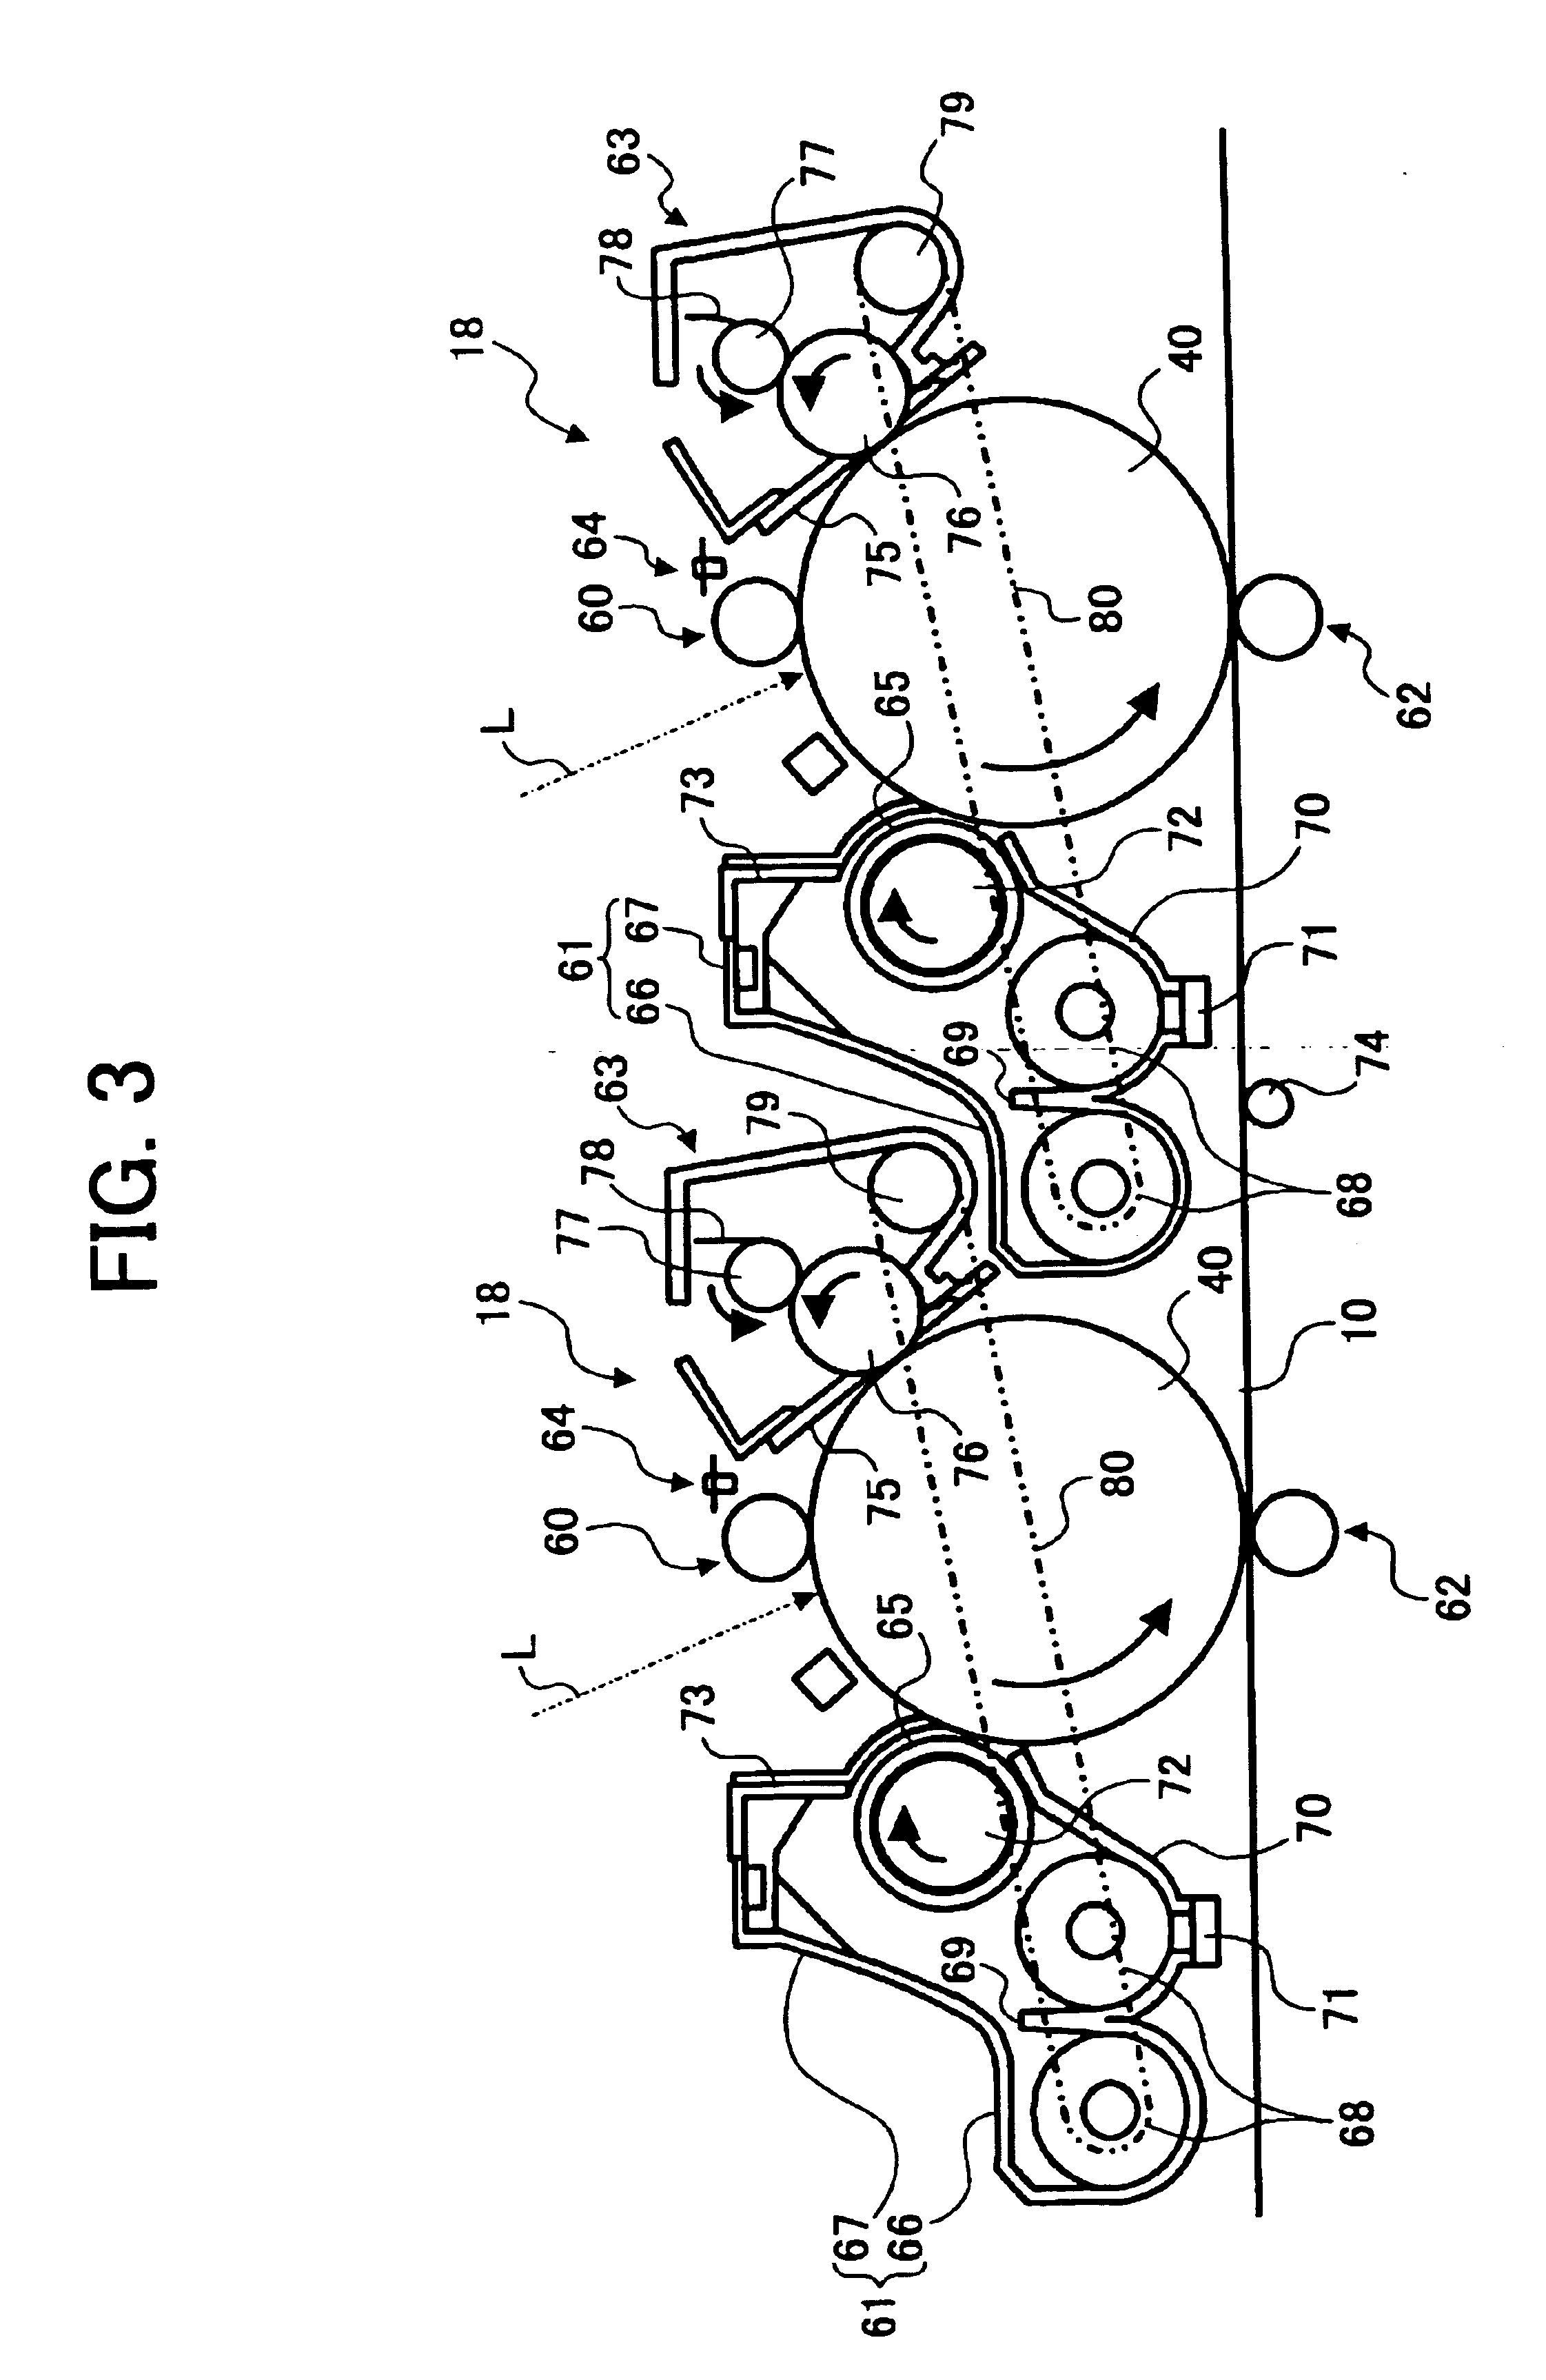 Toner, developer, and image forming method and apparatus